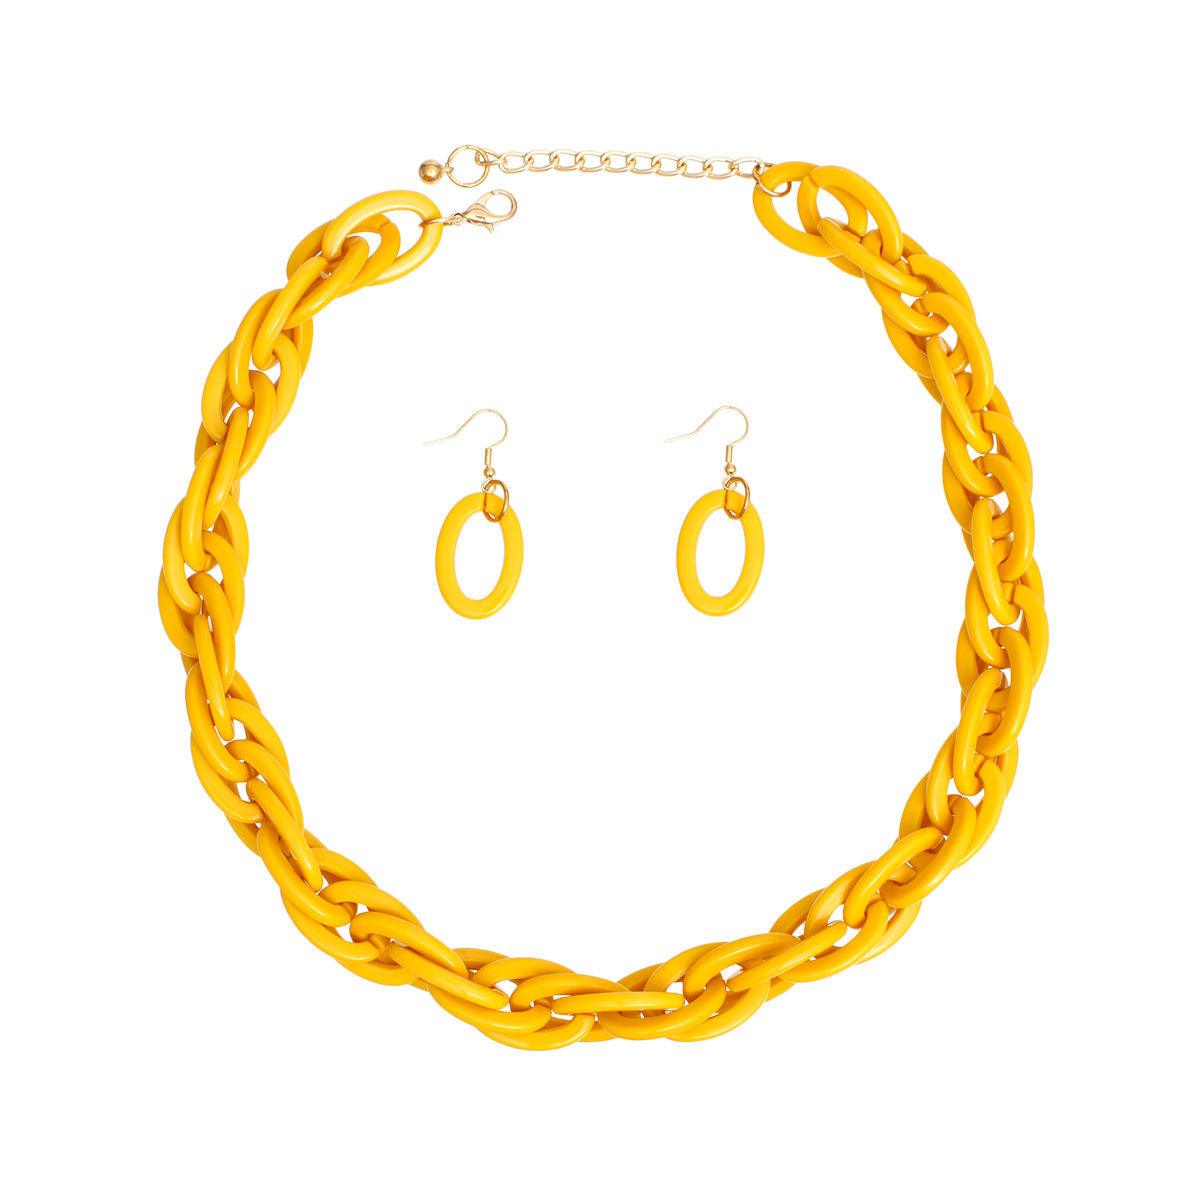 Stylish Acrylic Yellow Chain Necklace, Earrings - Metal Fastening